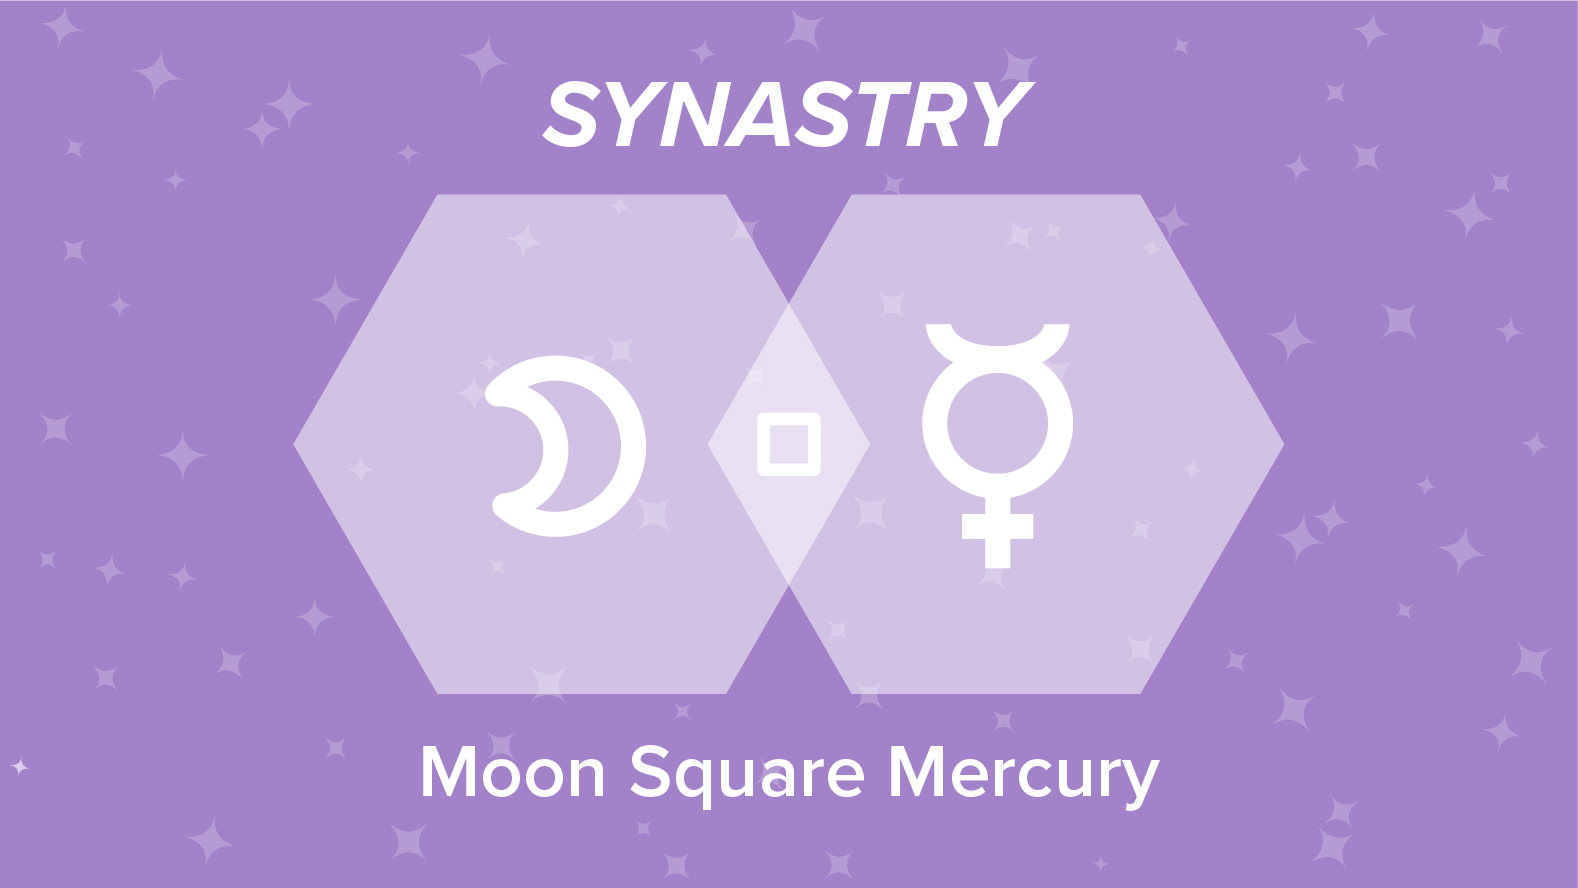 Moon Square Mercury Synastry: Relationships and Friendships Explained